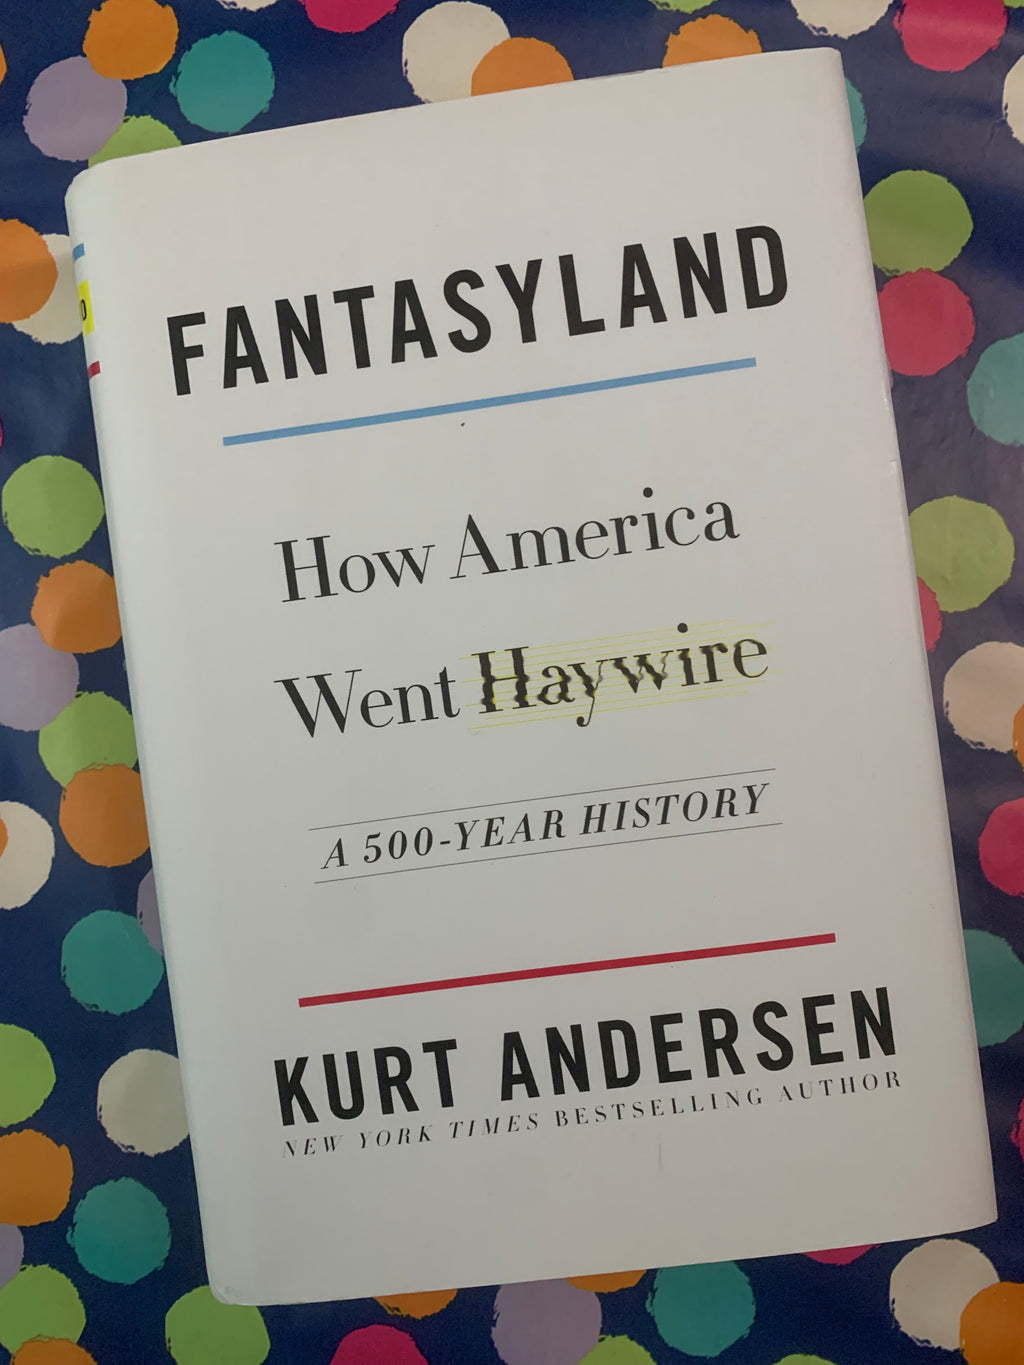 Fantasyland: How America Went Haywire a 500-Year History- By Kurt Andersen